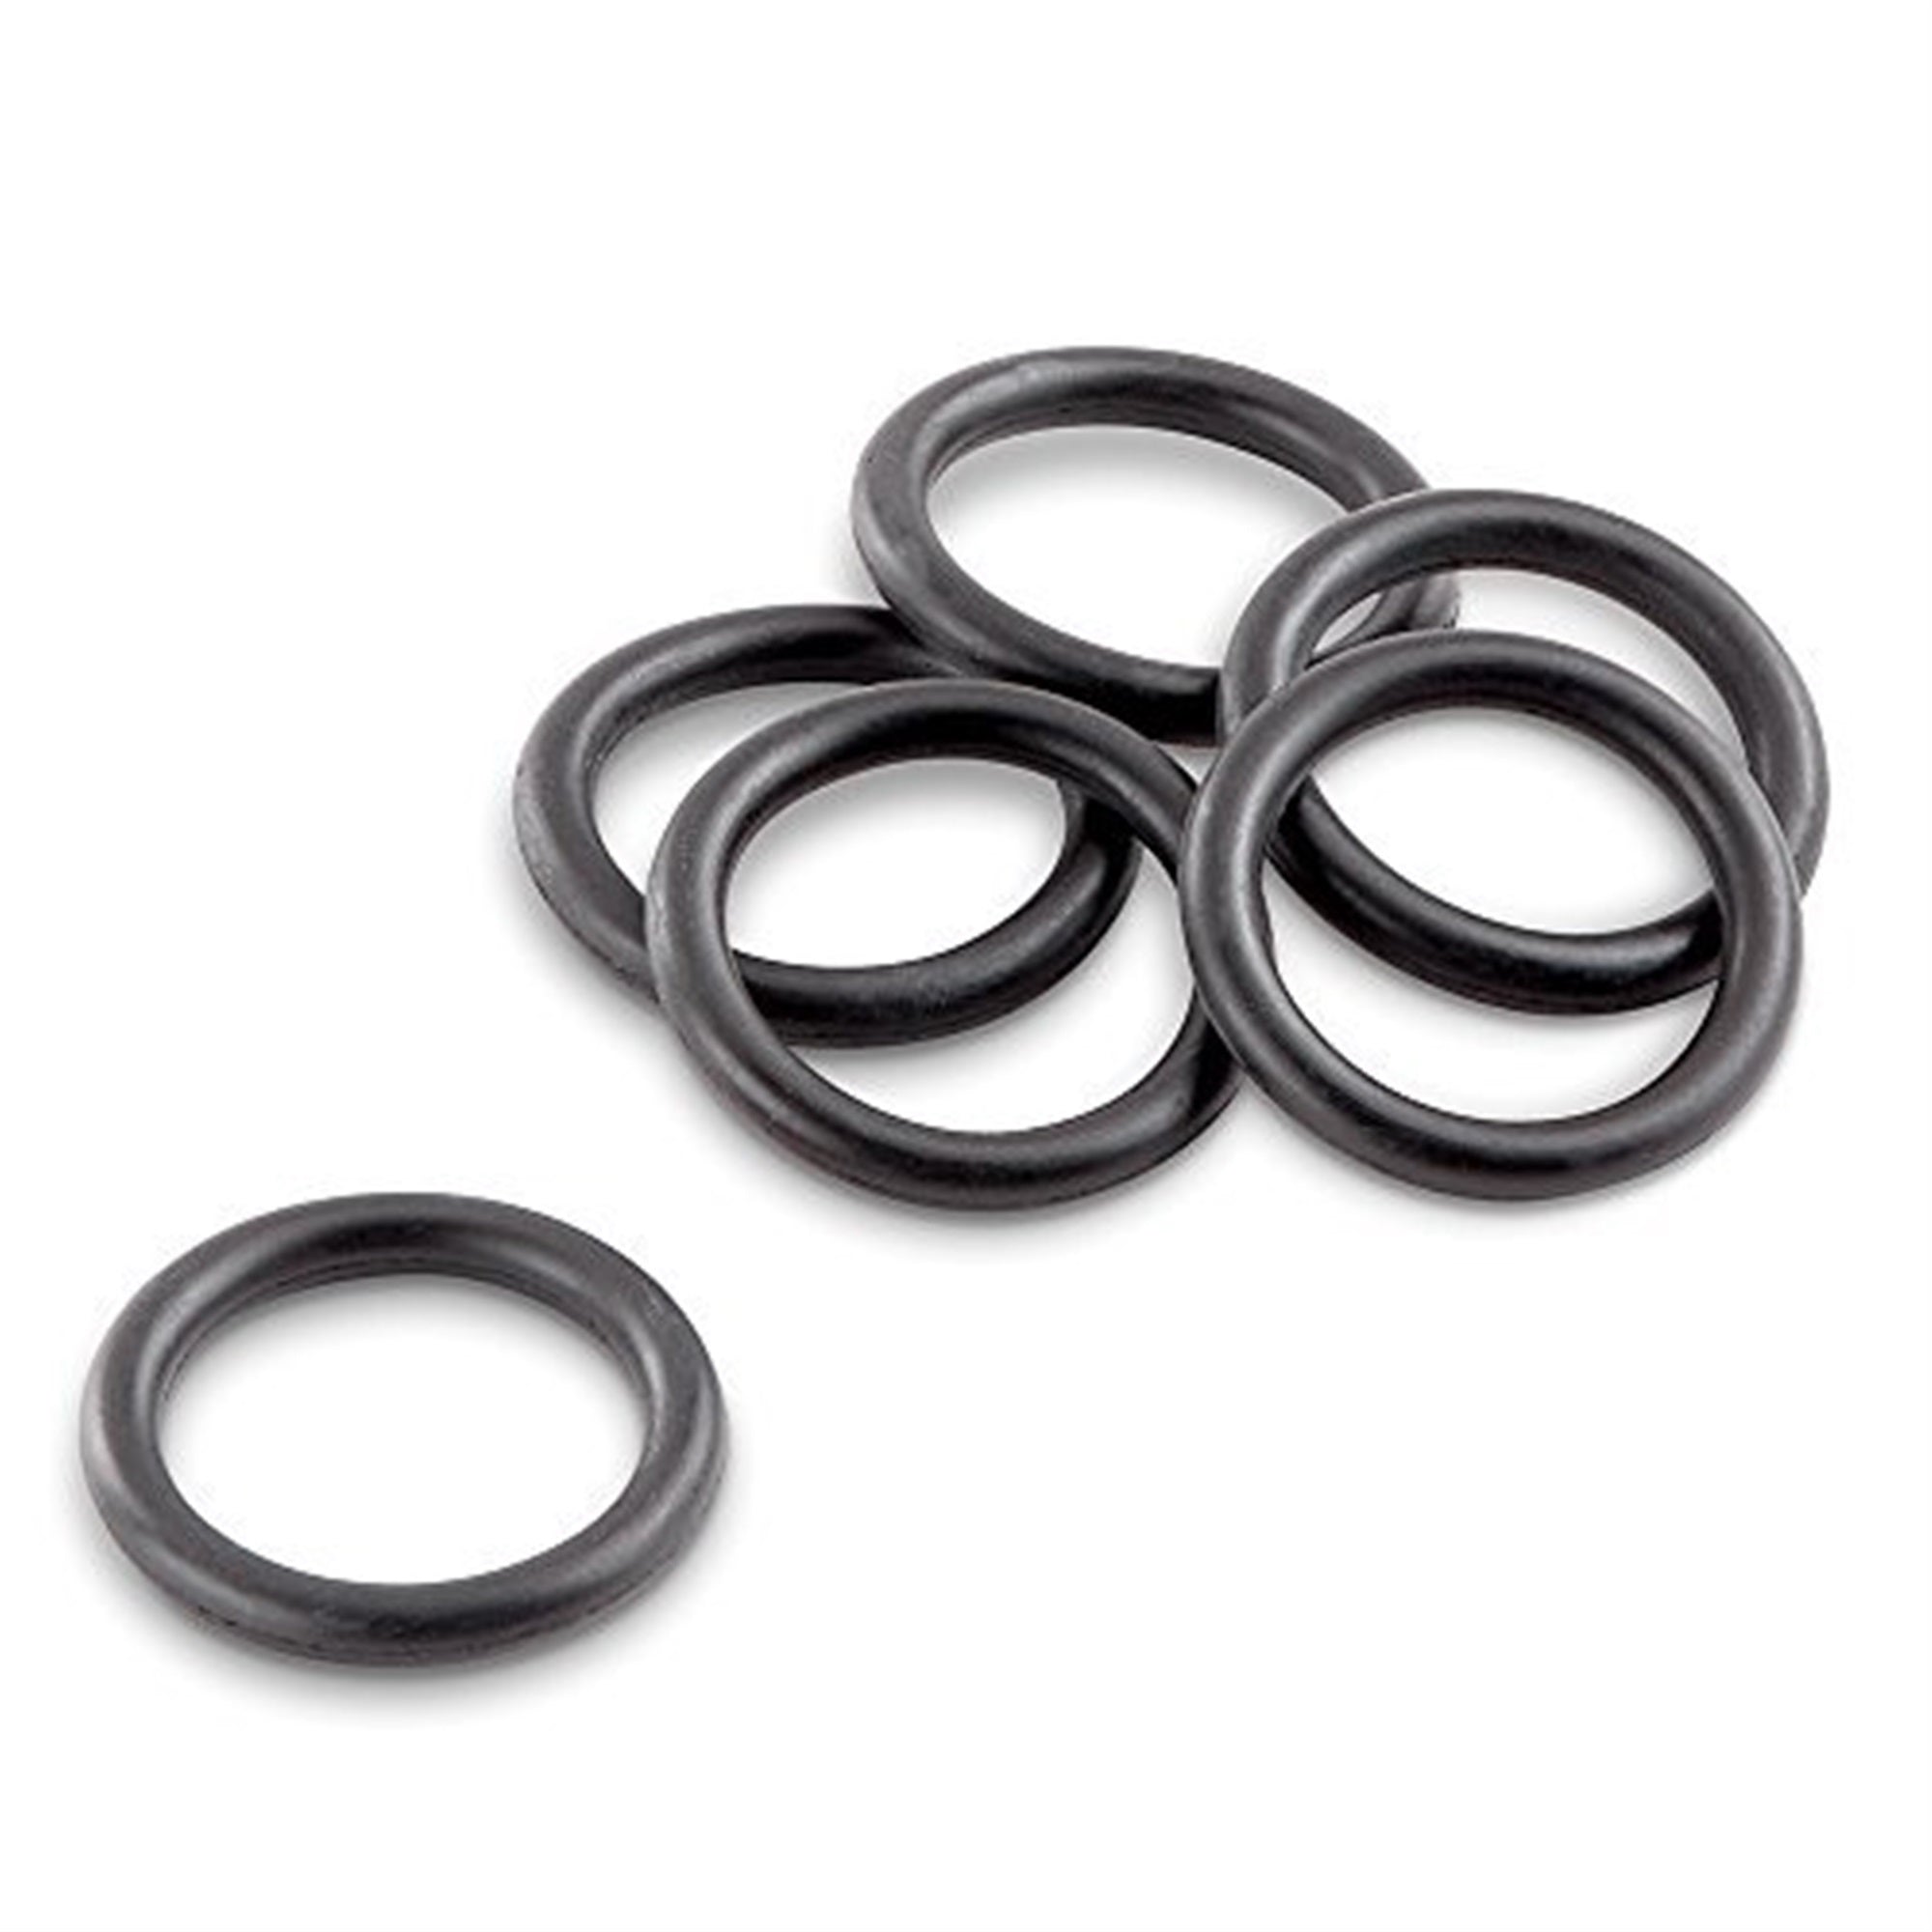 Gilmour Pro O-Ring Rubber Replacement Seals, 6 Pack